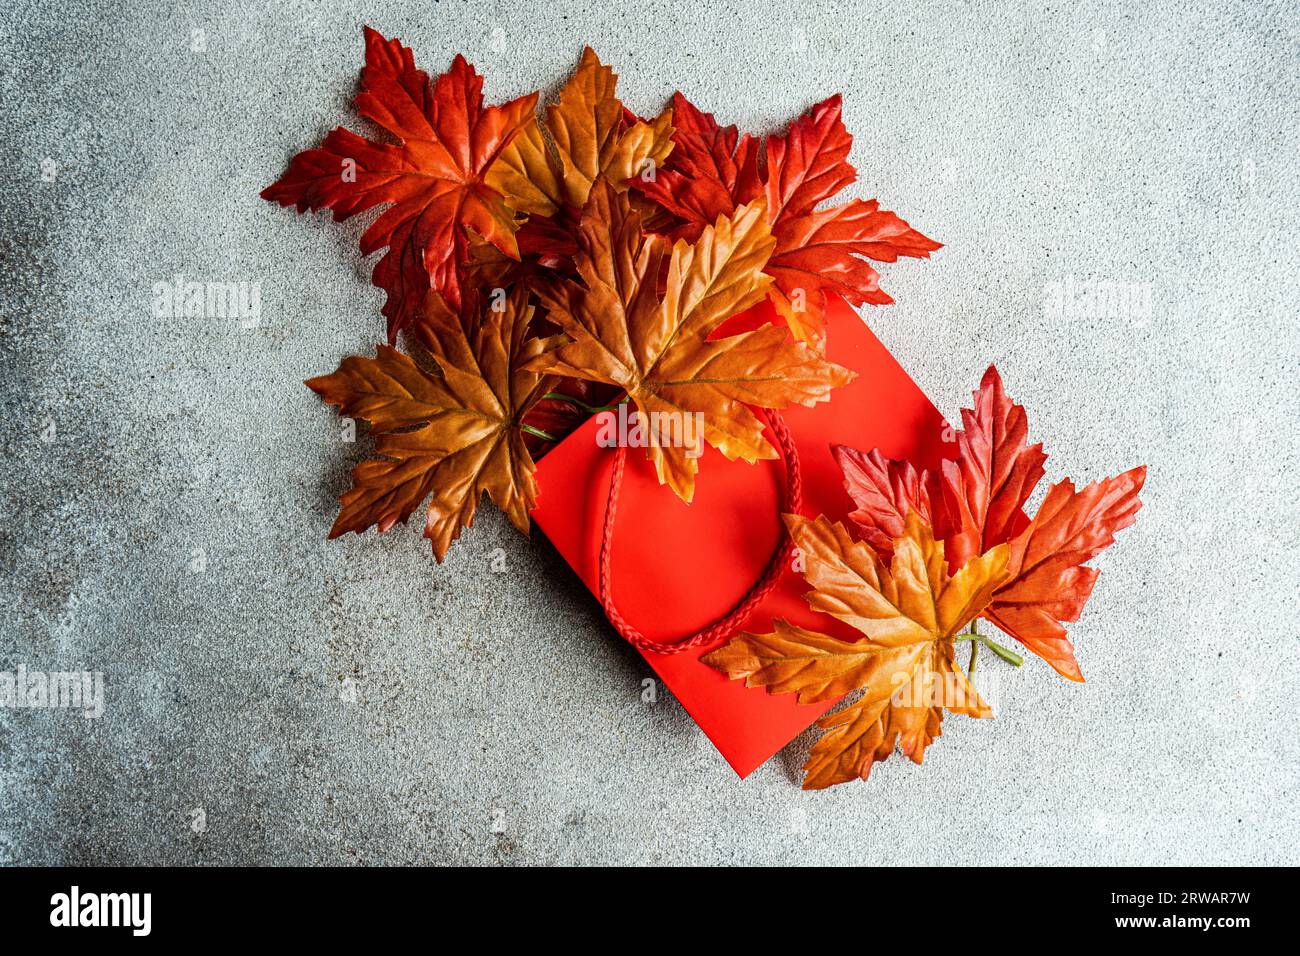 Red autumn maple leaves on top of a blank paper shopping bag Stock Photo